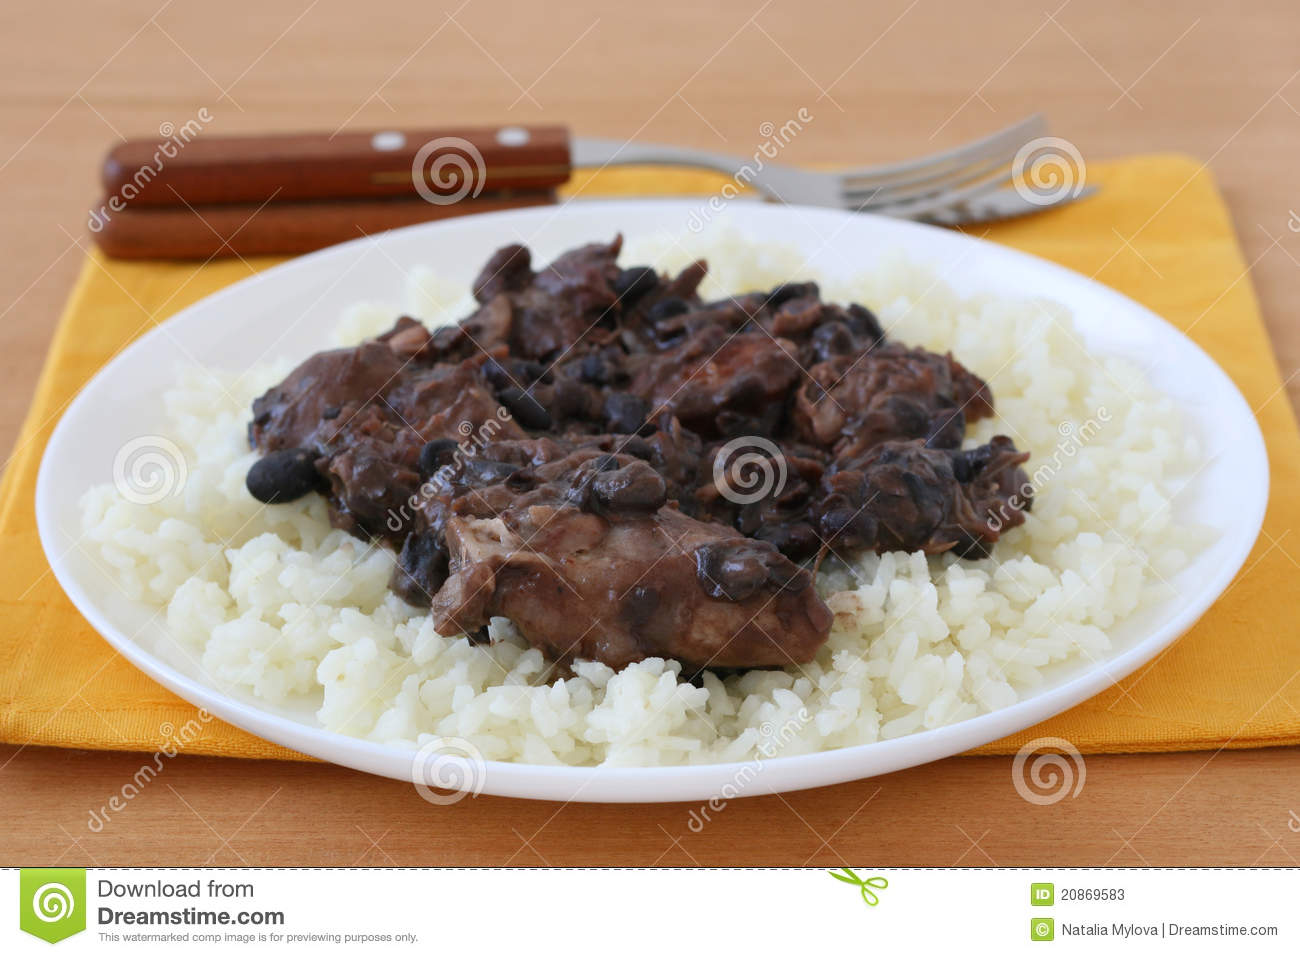 Meat With Sausages And Beans On Rice Stock Photos   Image  20869583